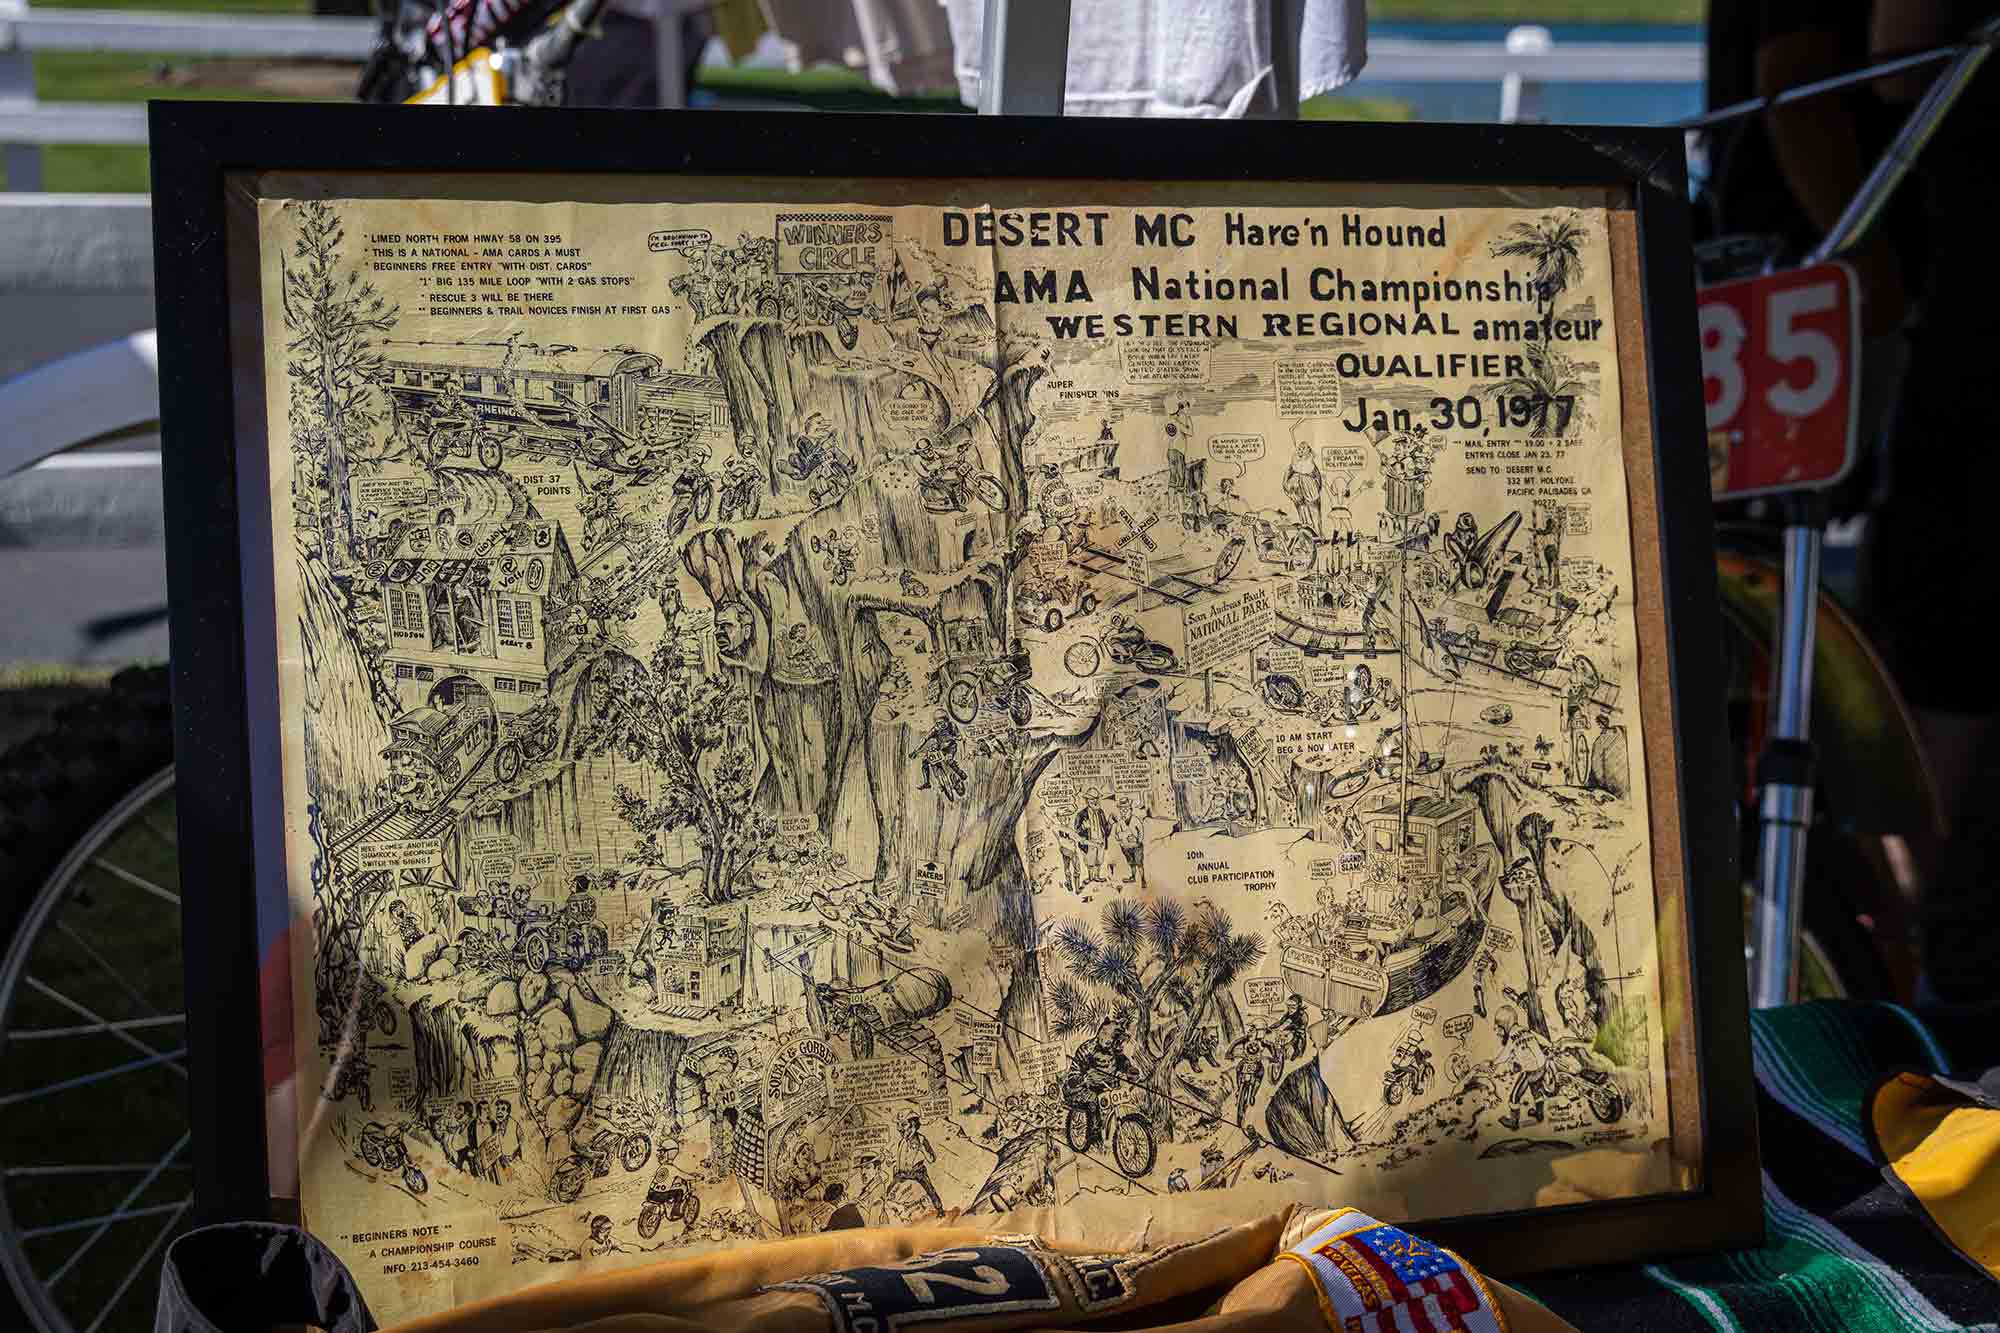 Desert racing memorabilia, such as this race poster from 1977, were on display from a number of clubs and organizations in attendance.